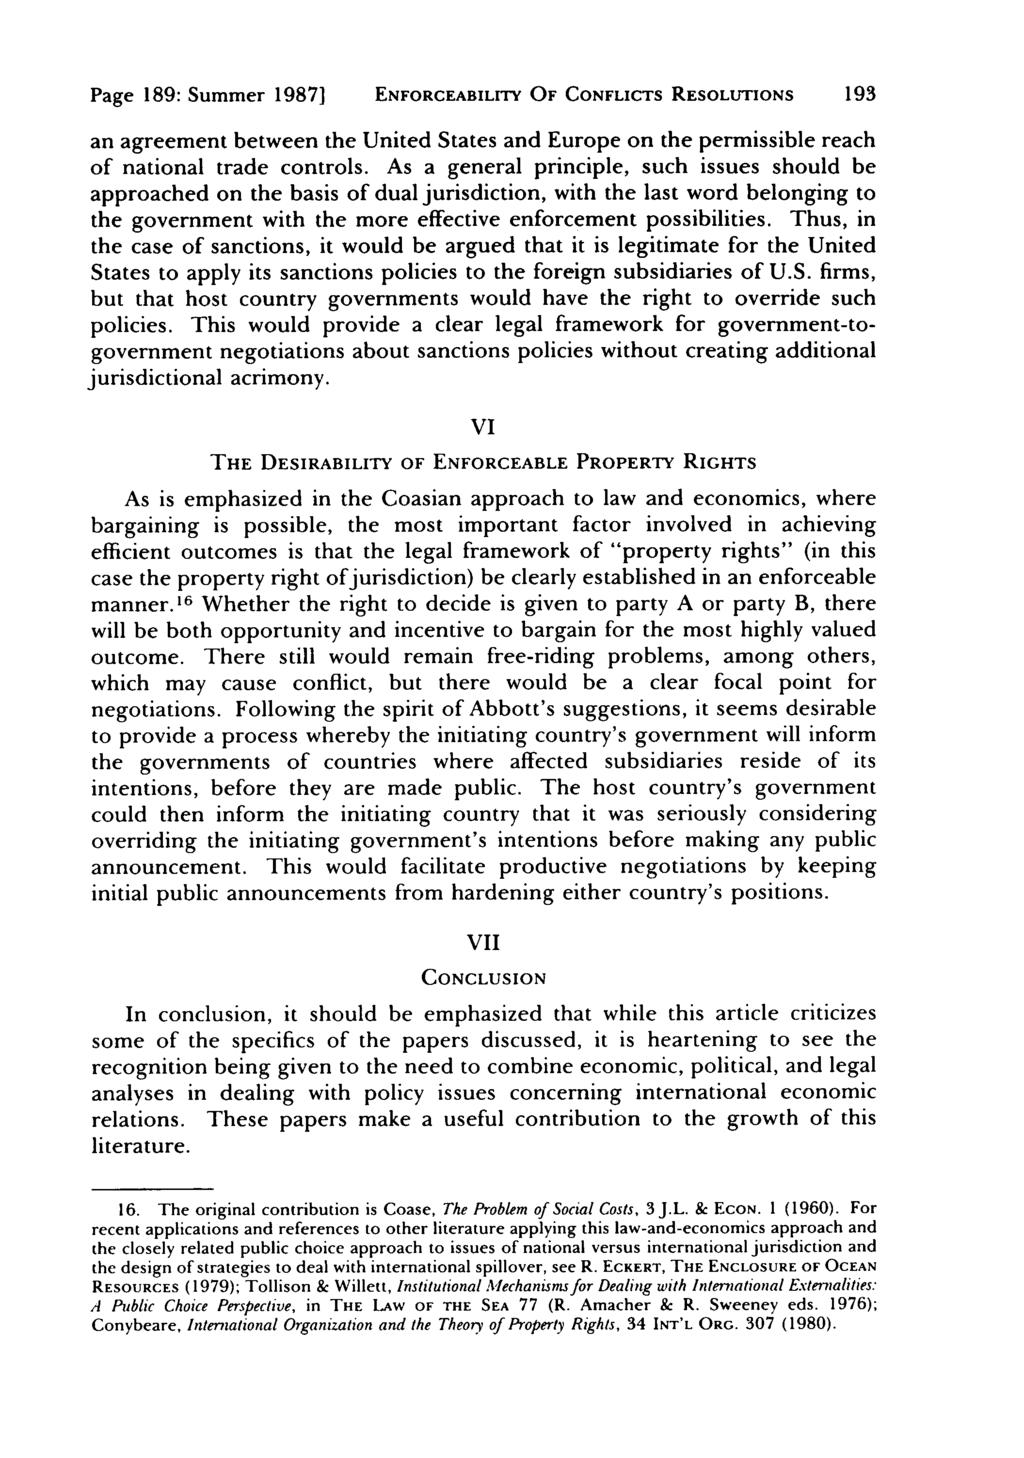 Page 189: Summer 1987] ENFORCEABILITY OF CONFLICTS RESOLUTIONS an agreement between the United States and Europe on the permissible reach of national trade controls.